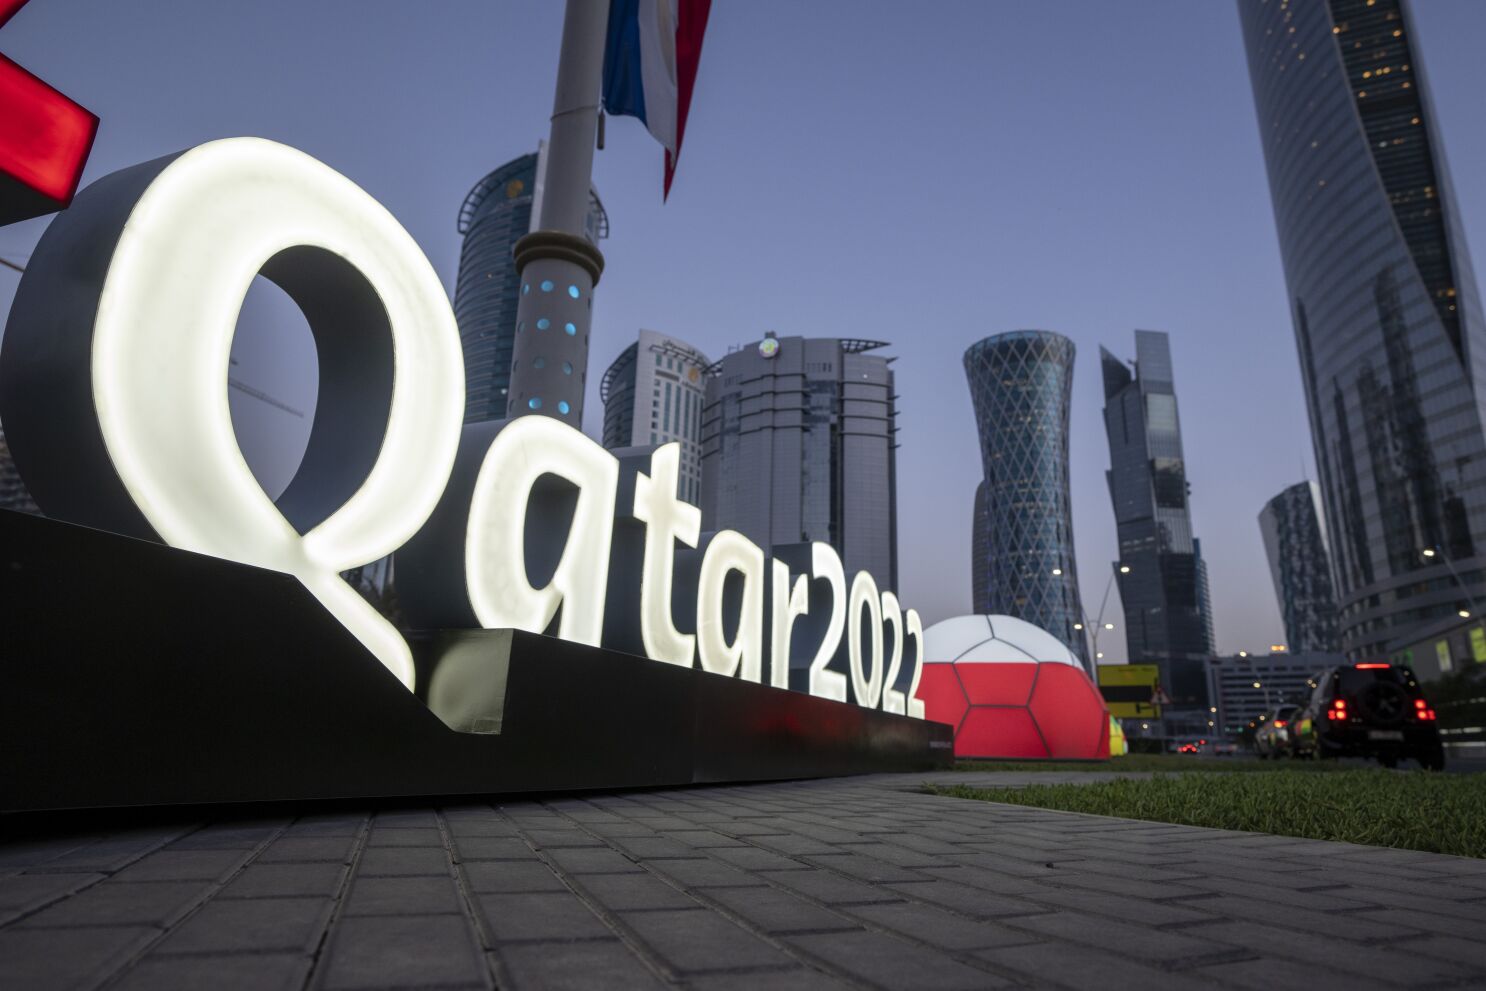 Qatar World Cup News: World Cup in Qatar has sparked protests, but why?